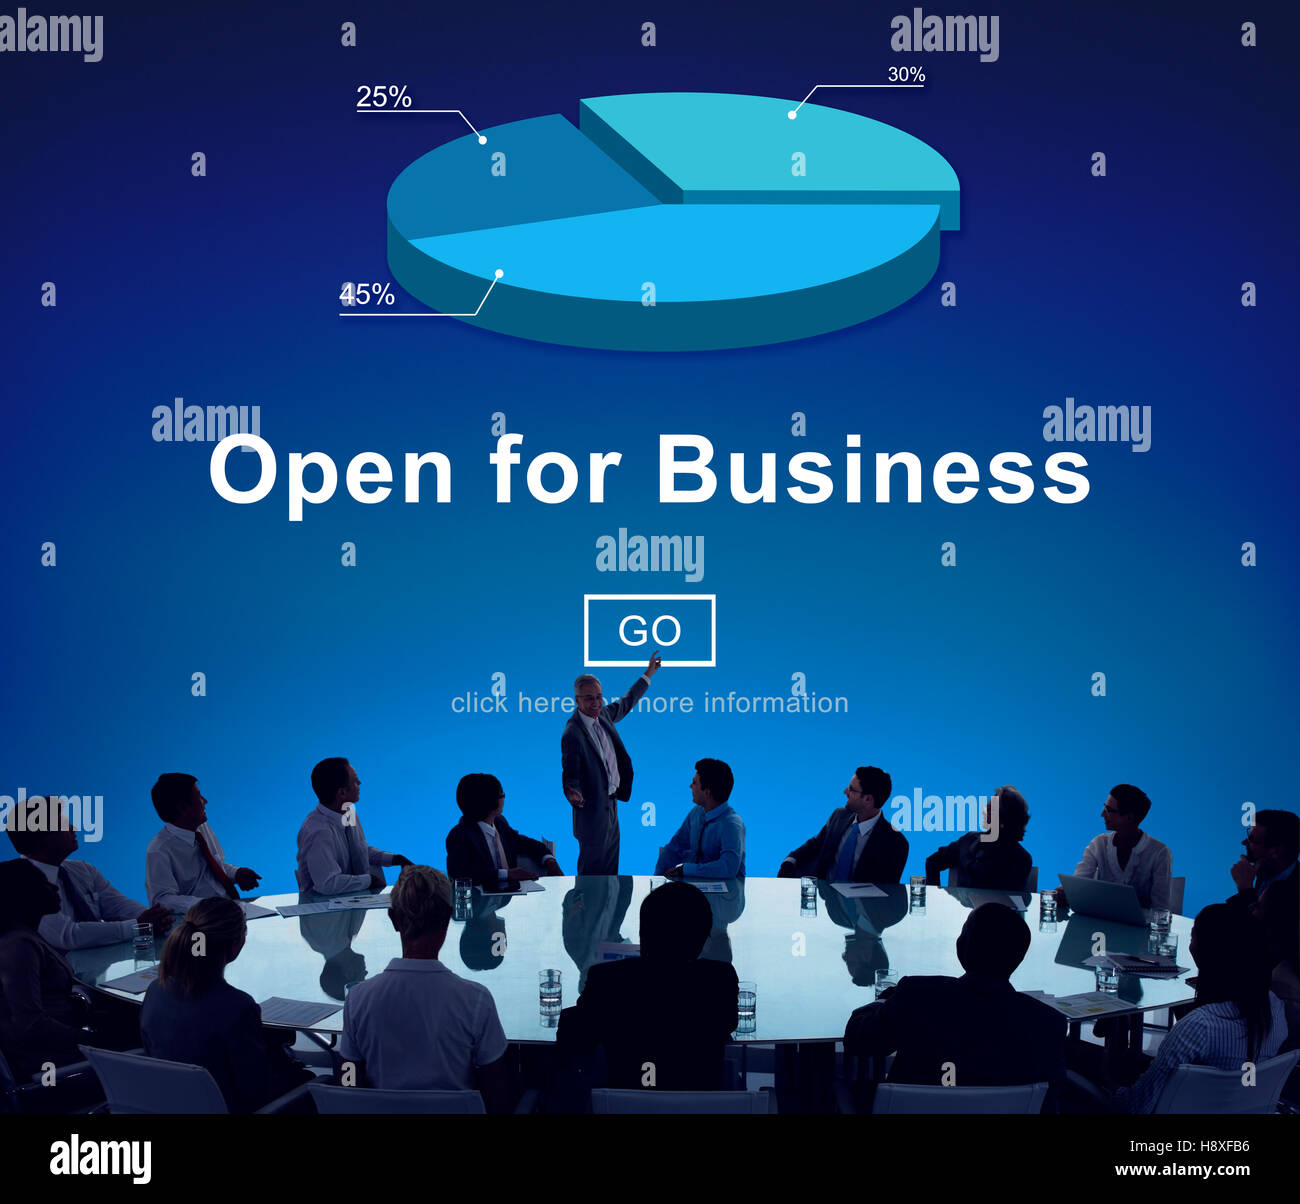 Open for Business Partnership Industry Concept Stock Photo